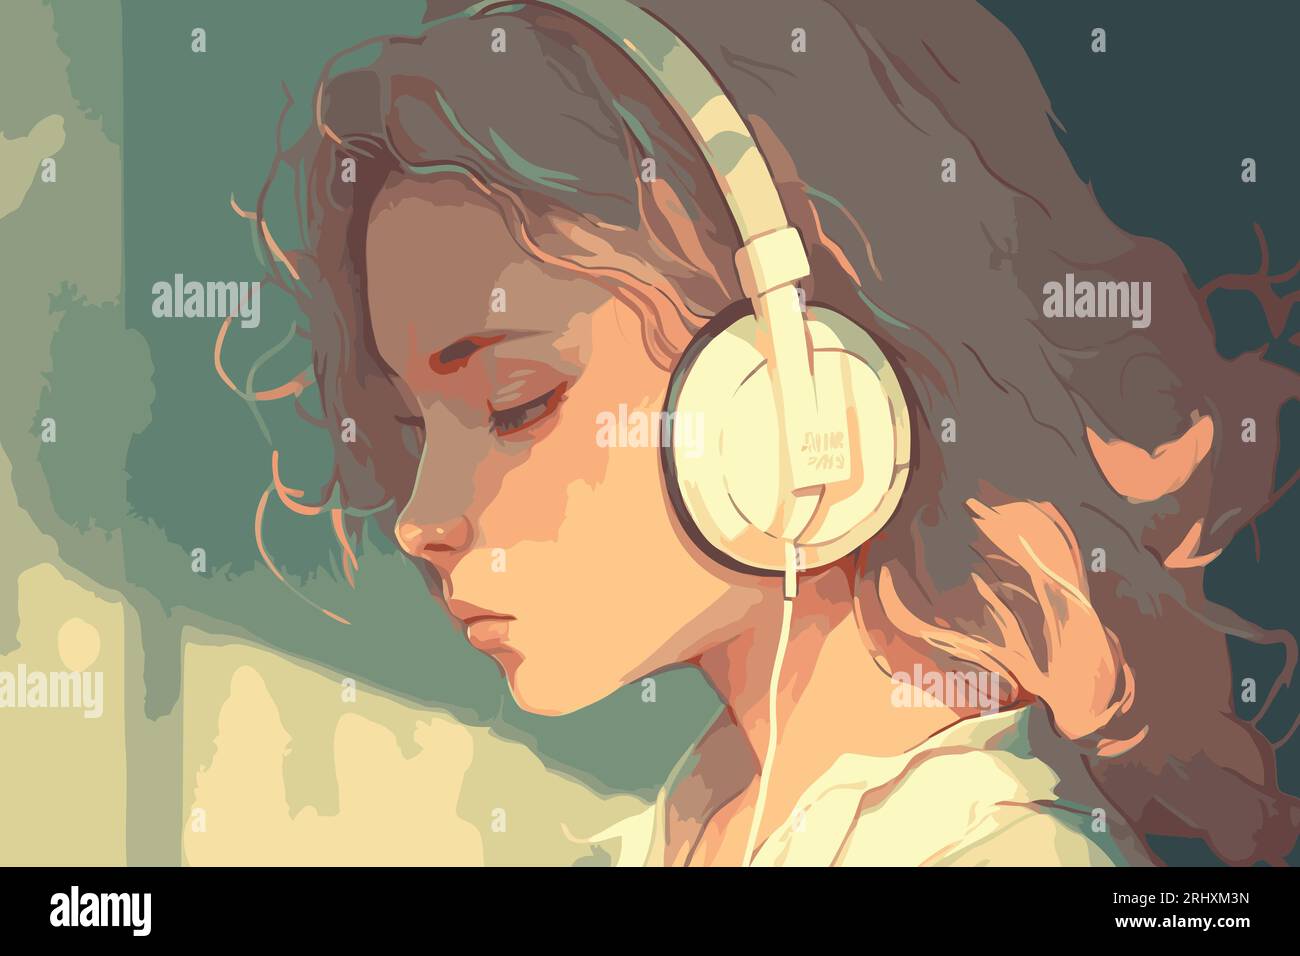 History of Anime Music: From Classics to Modern Hits | Deezer